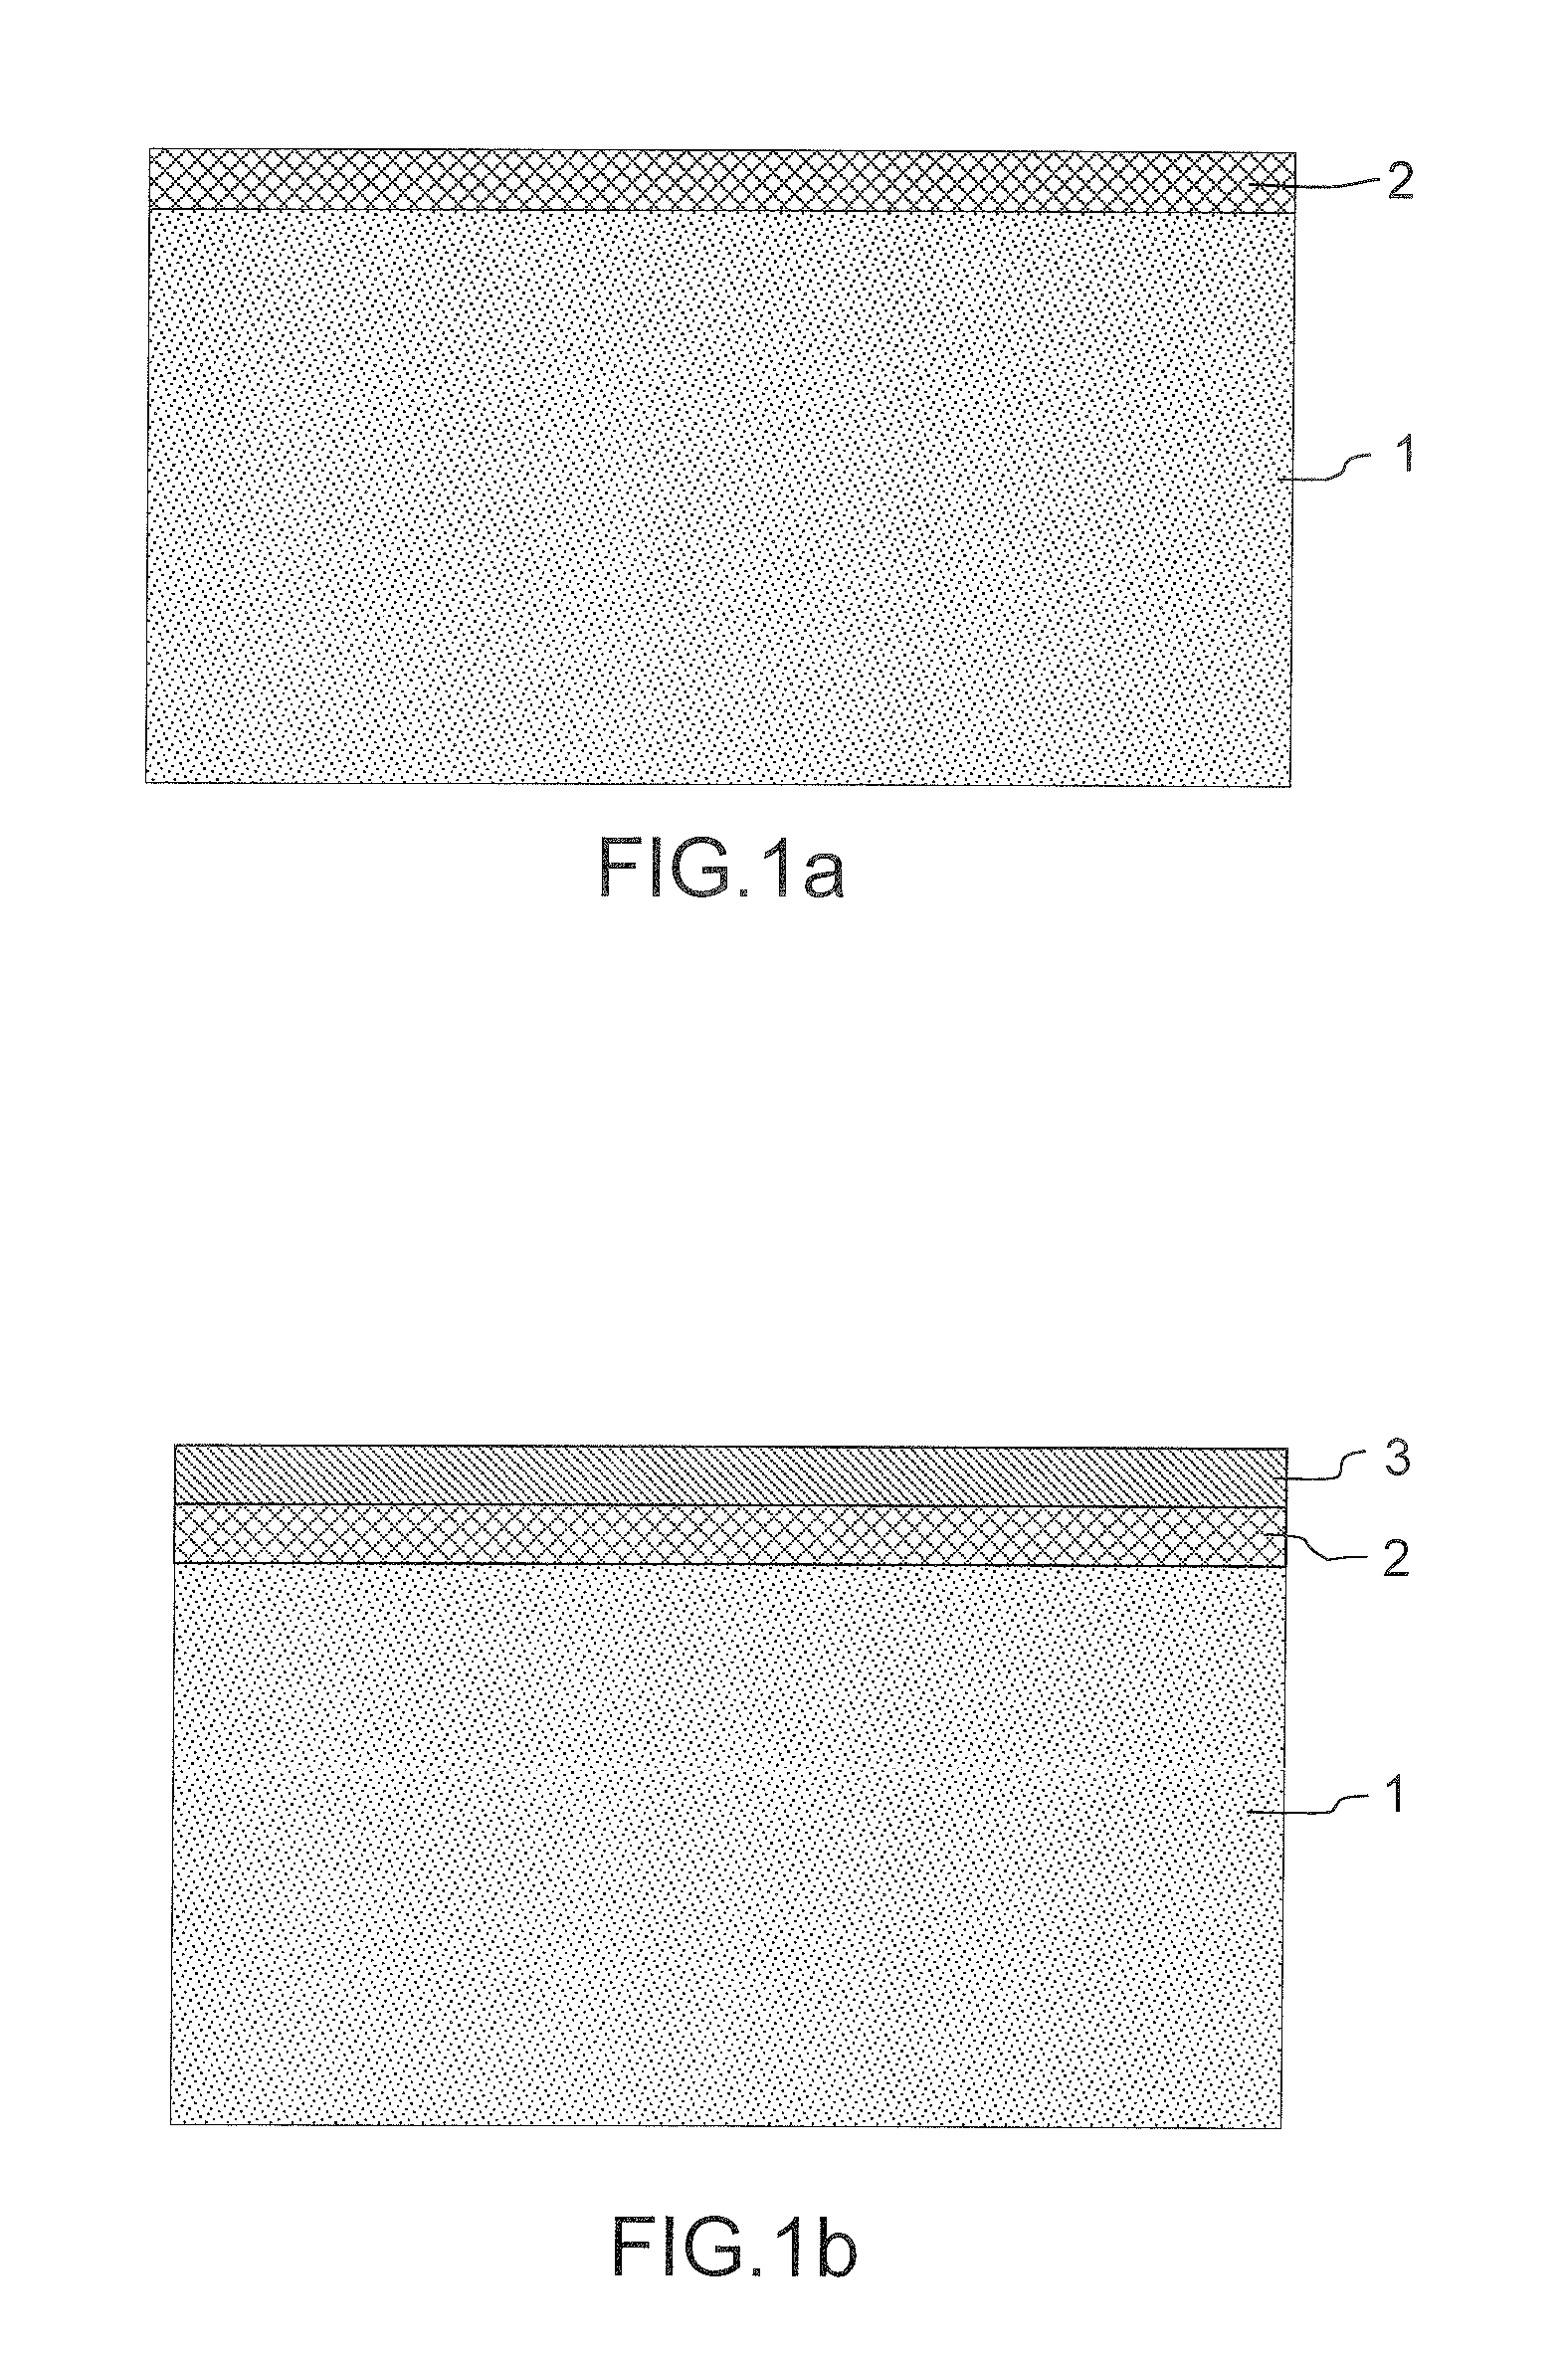 Method for the Collective Fabrication of Carbon Nanofibers on the Surface of Micropatterns Constructed on the Surface of a Substrate and Structure Comprising Nanofibers on the Surface of Micropatterns